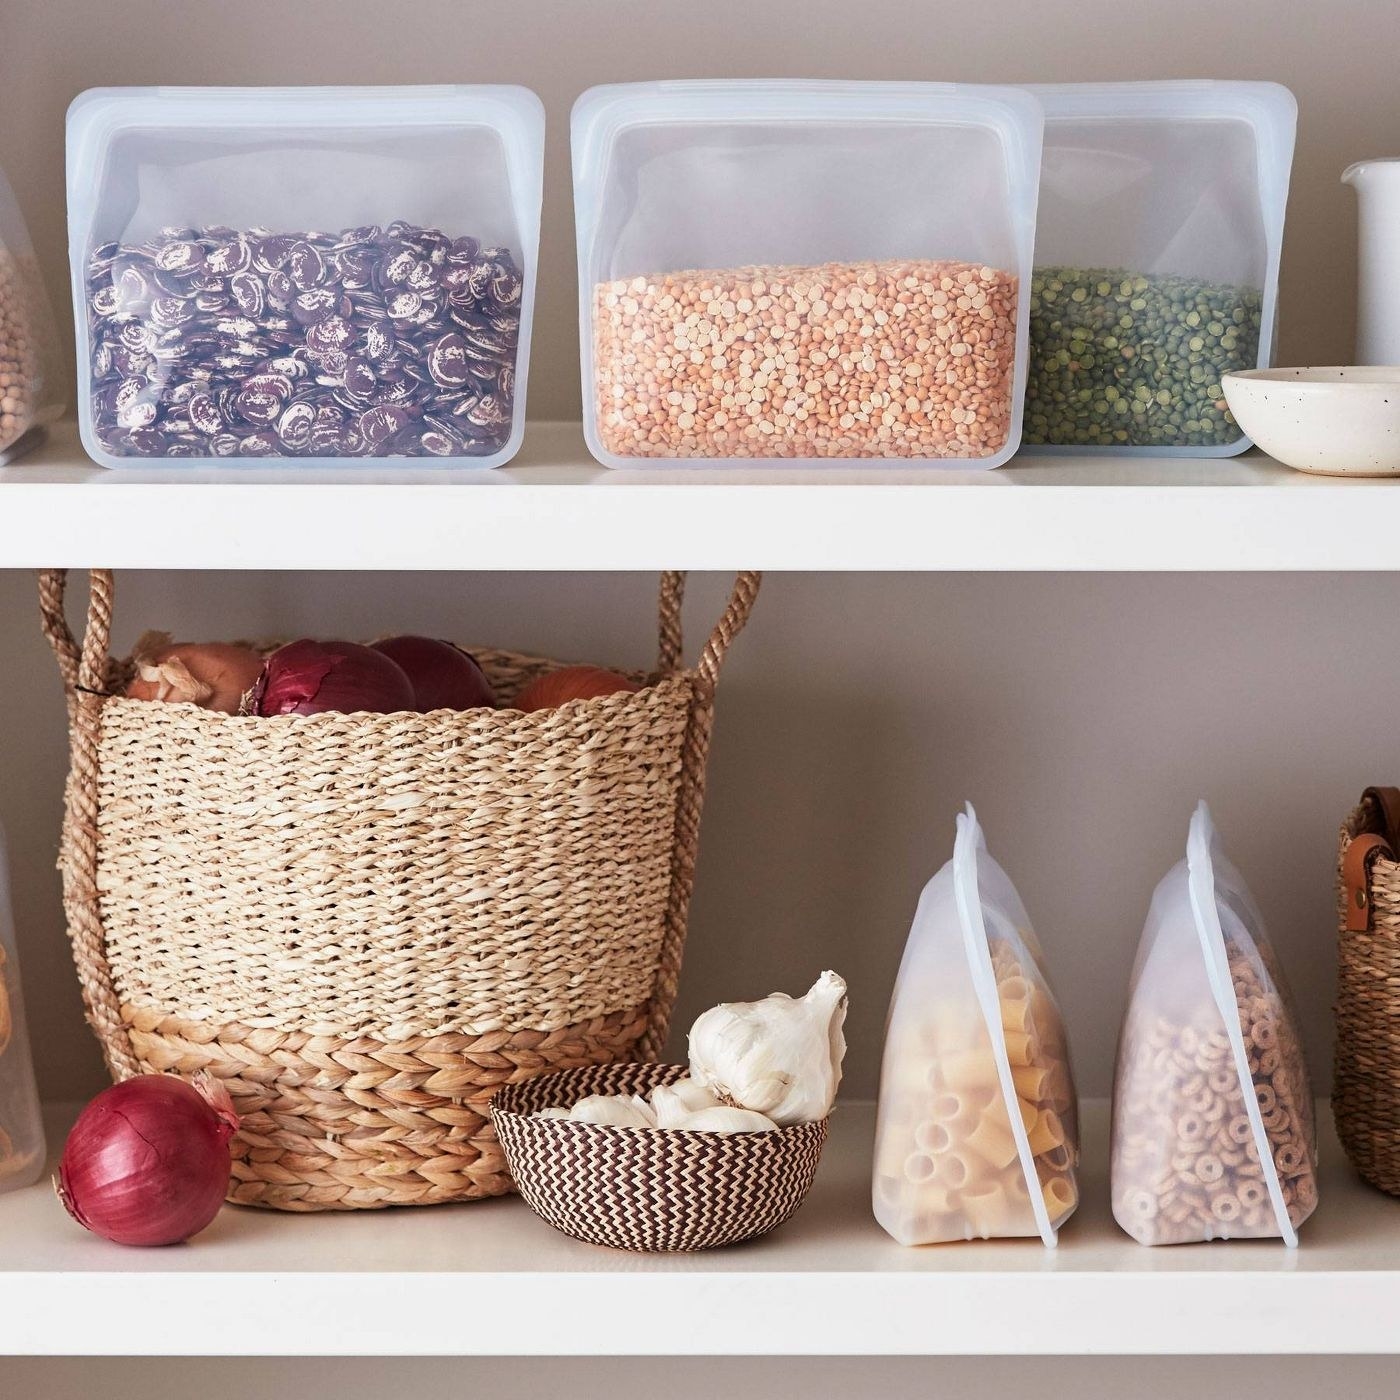 The bags in a pantry with food in them